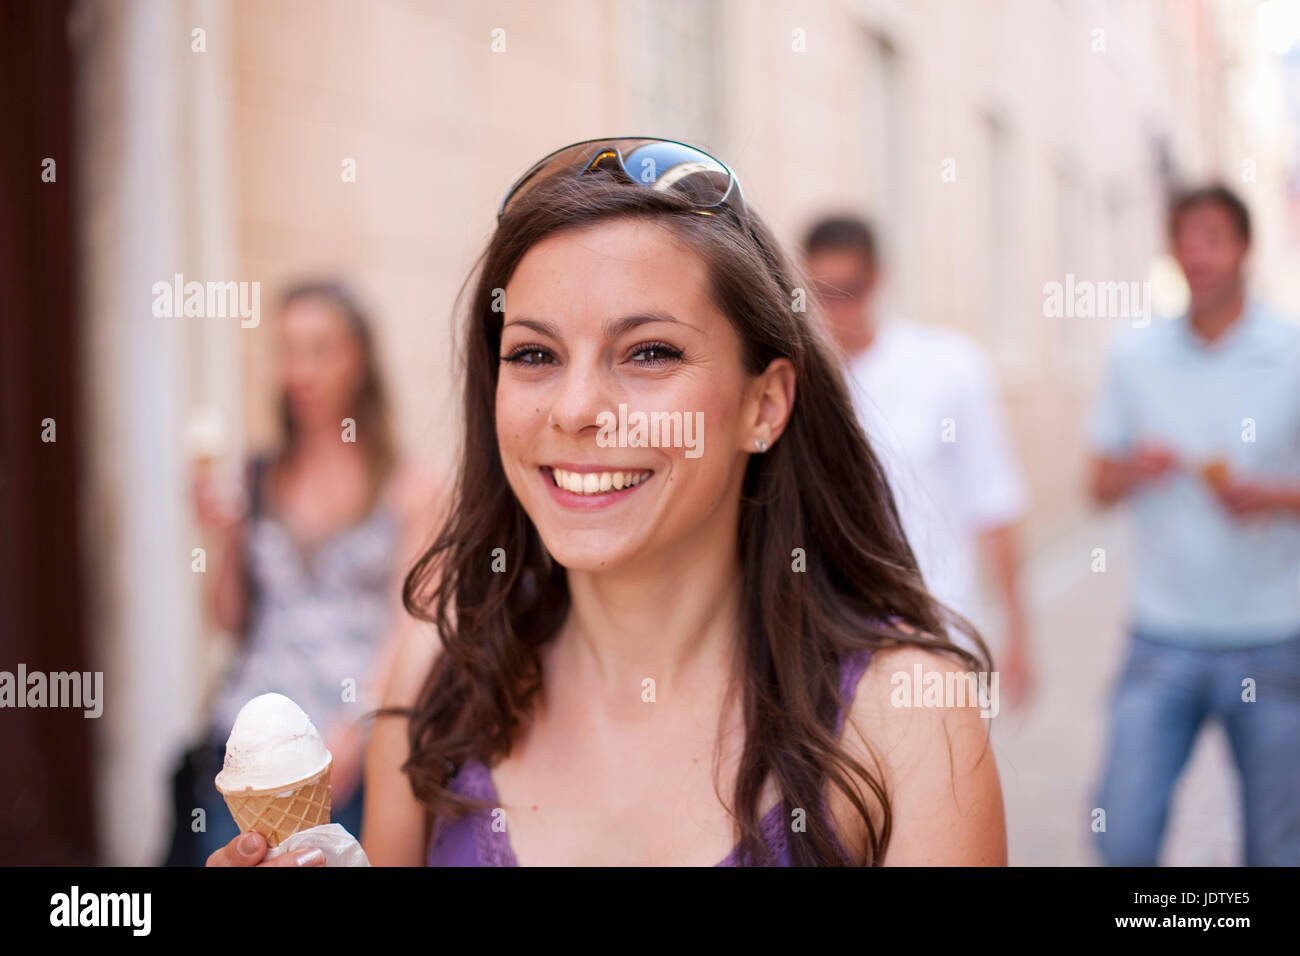 Smiling woman with ice cream cone Stock Photo